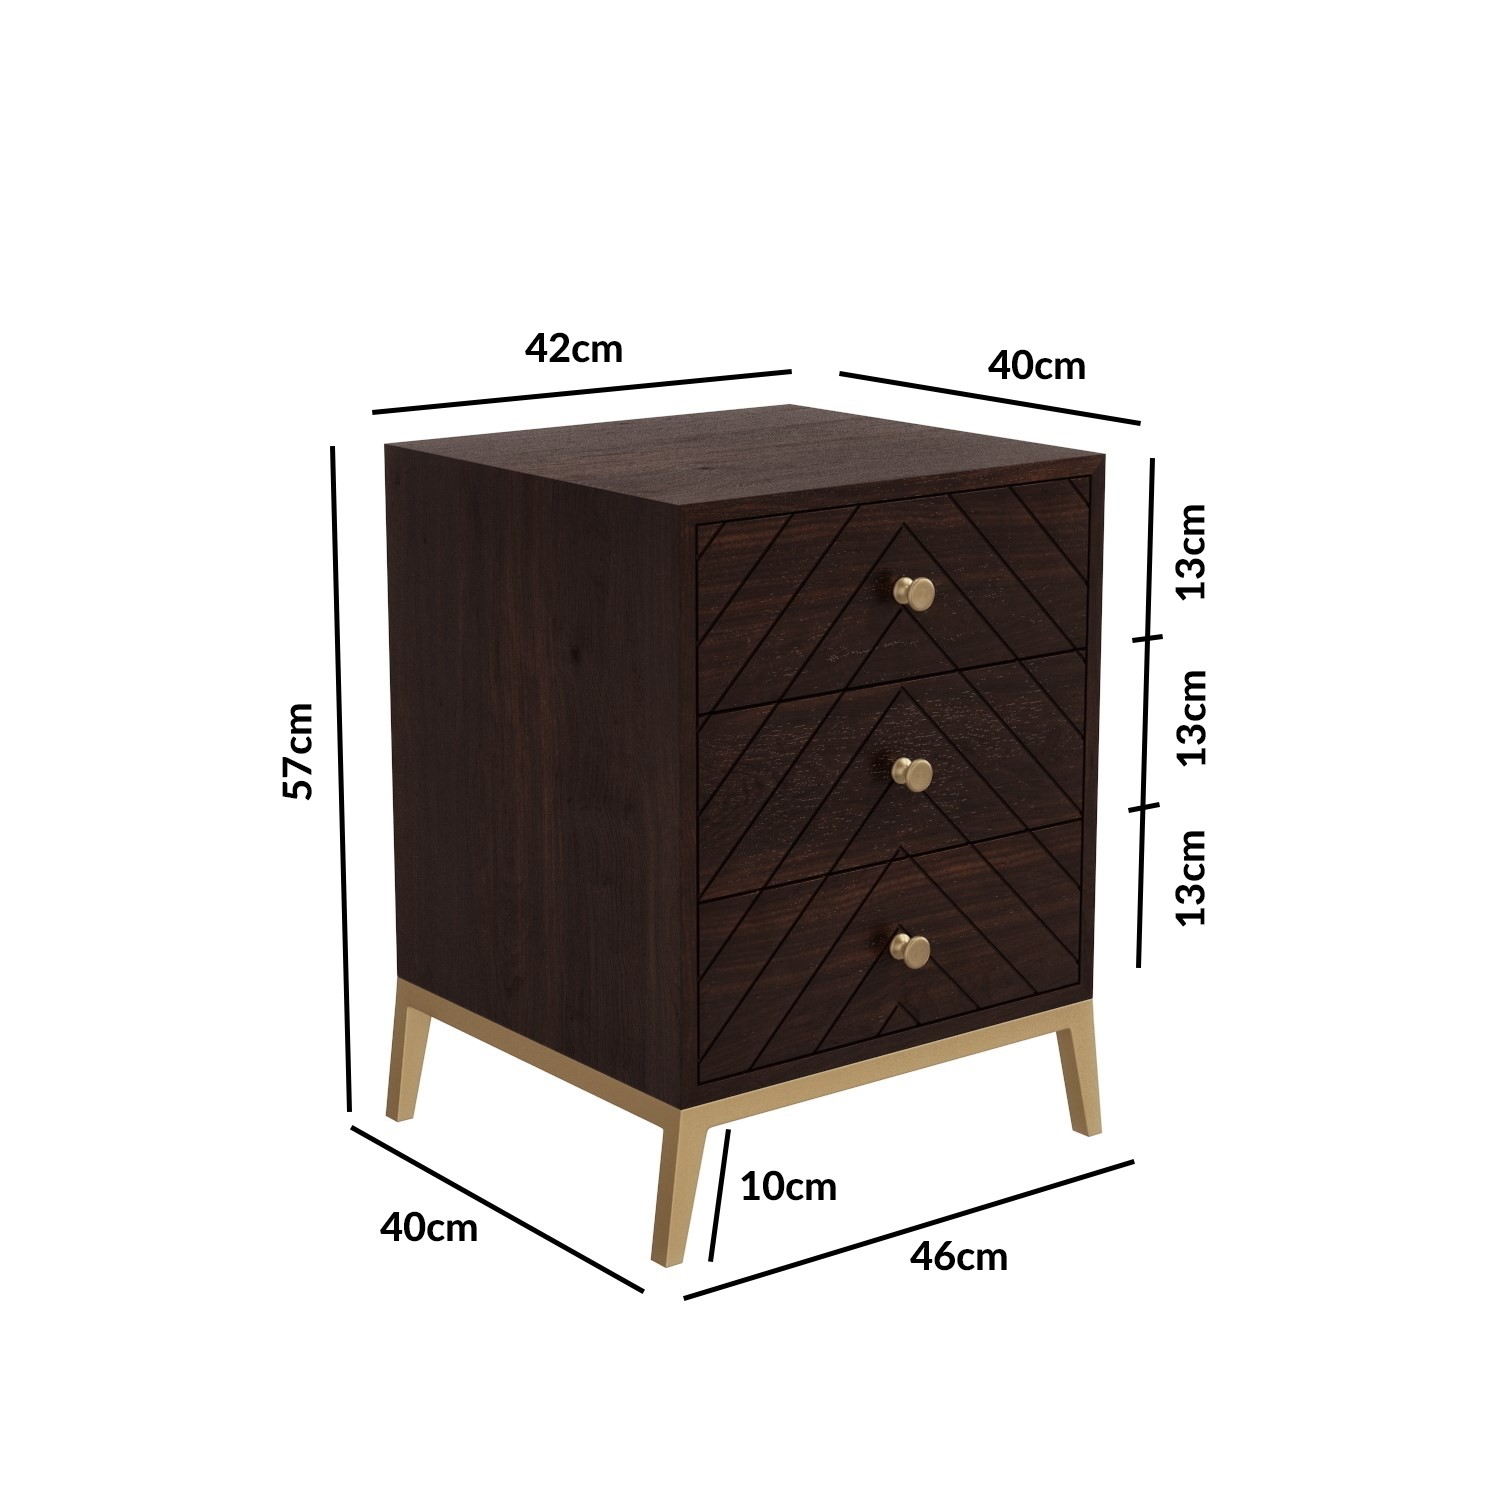 Read more about Mango wood chevron 3 drawer bedside table with legs jude